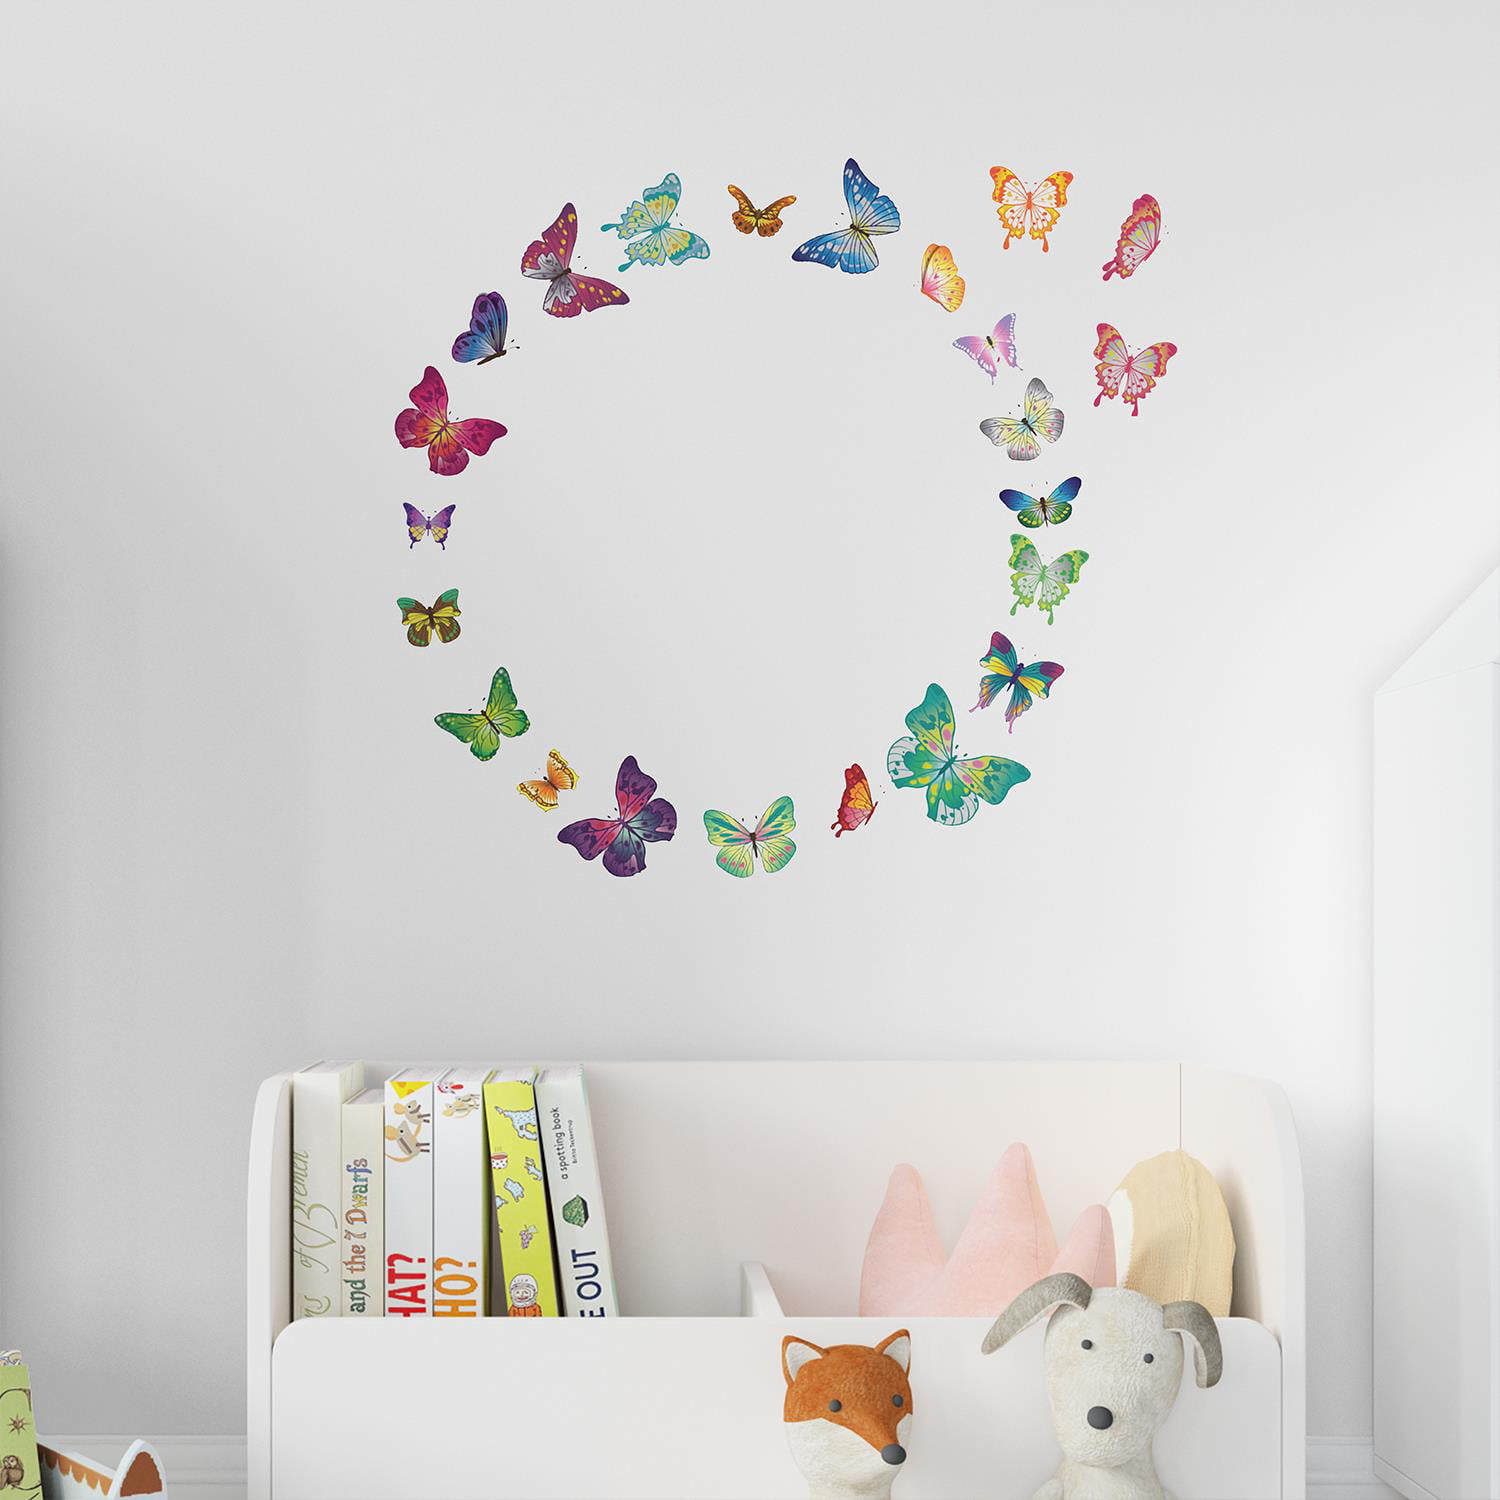 Walplus Mirror Wall Art "Birdcage" Wall Stickers Removable Self-Adhesive Mural 